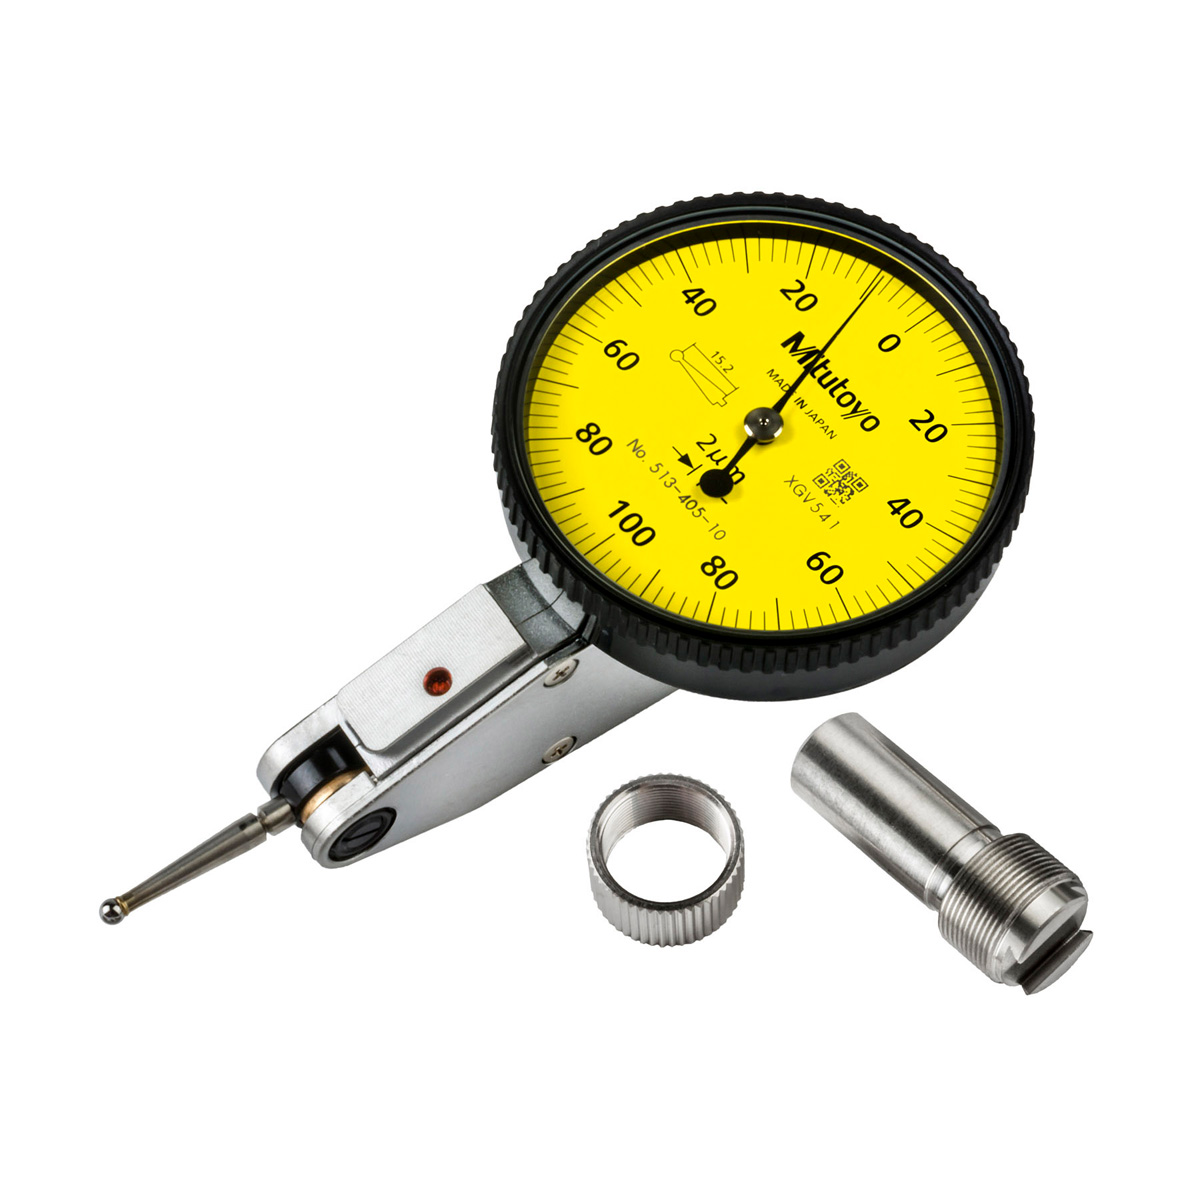 Mitutoyo 513-405-10E Dial Test Indicator Basic Set Standard0.2mm - Click Image to Close